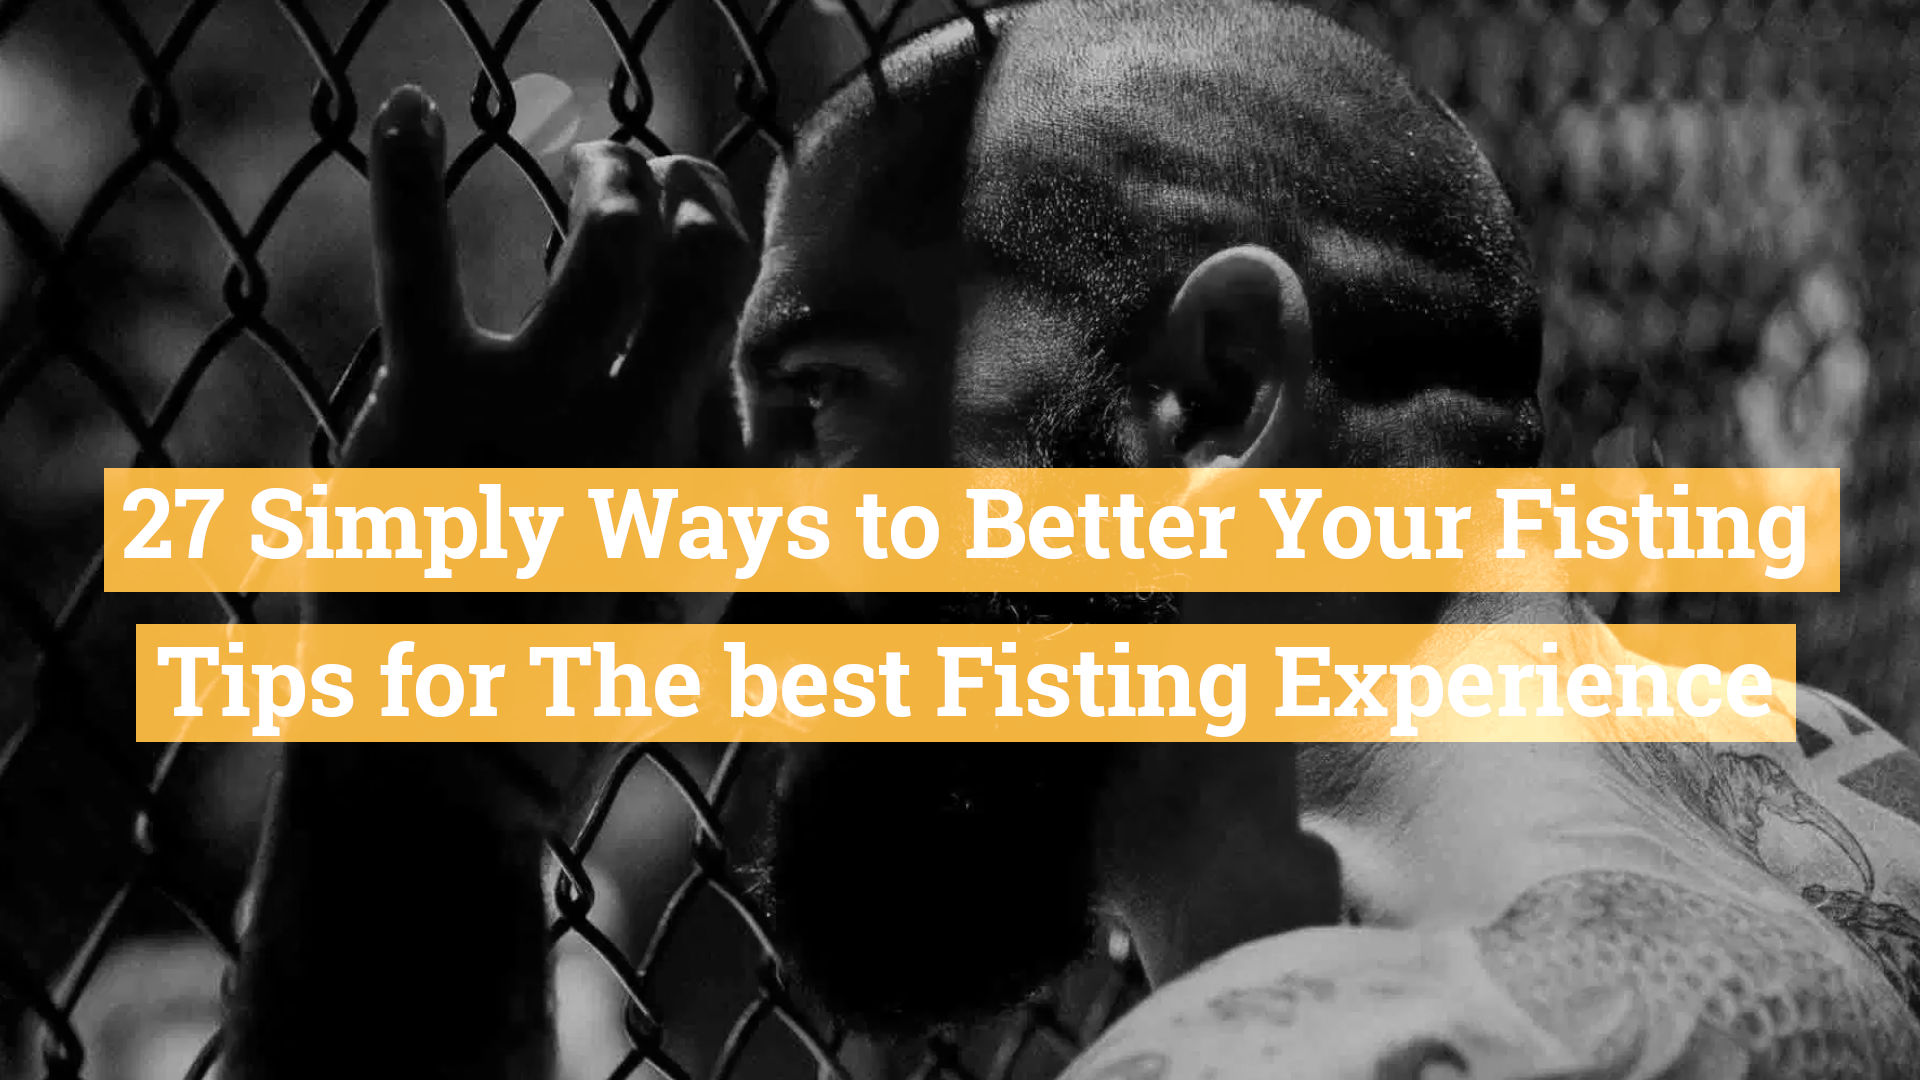 27 Simply Ways to Better Your Fisting Skills – Tips for better Anal Fisting Enjoyment